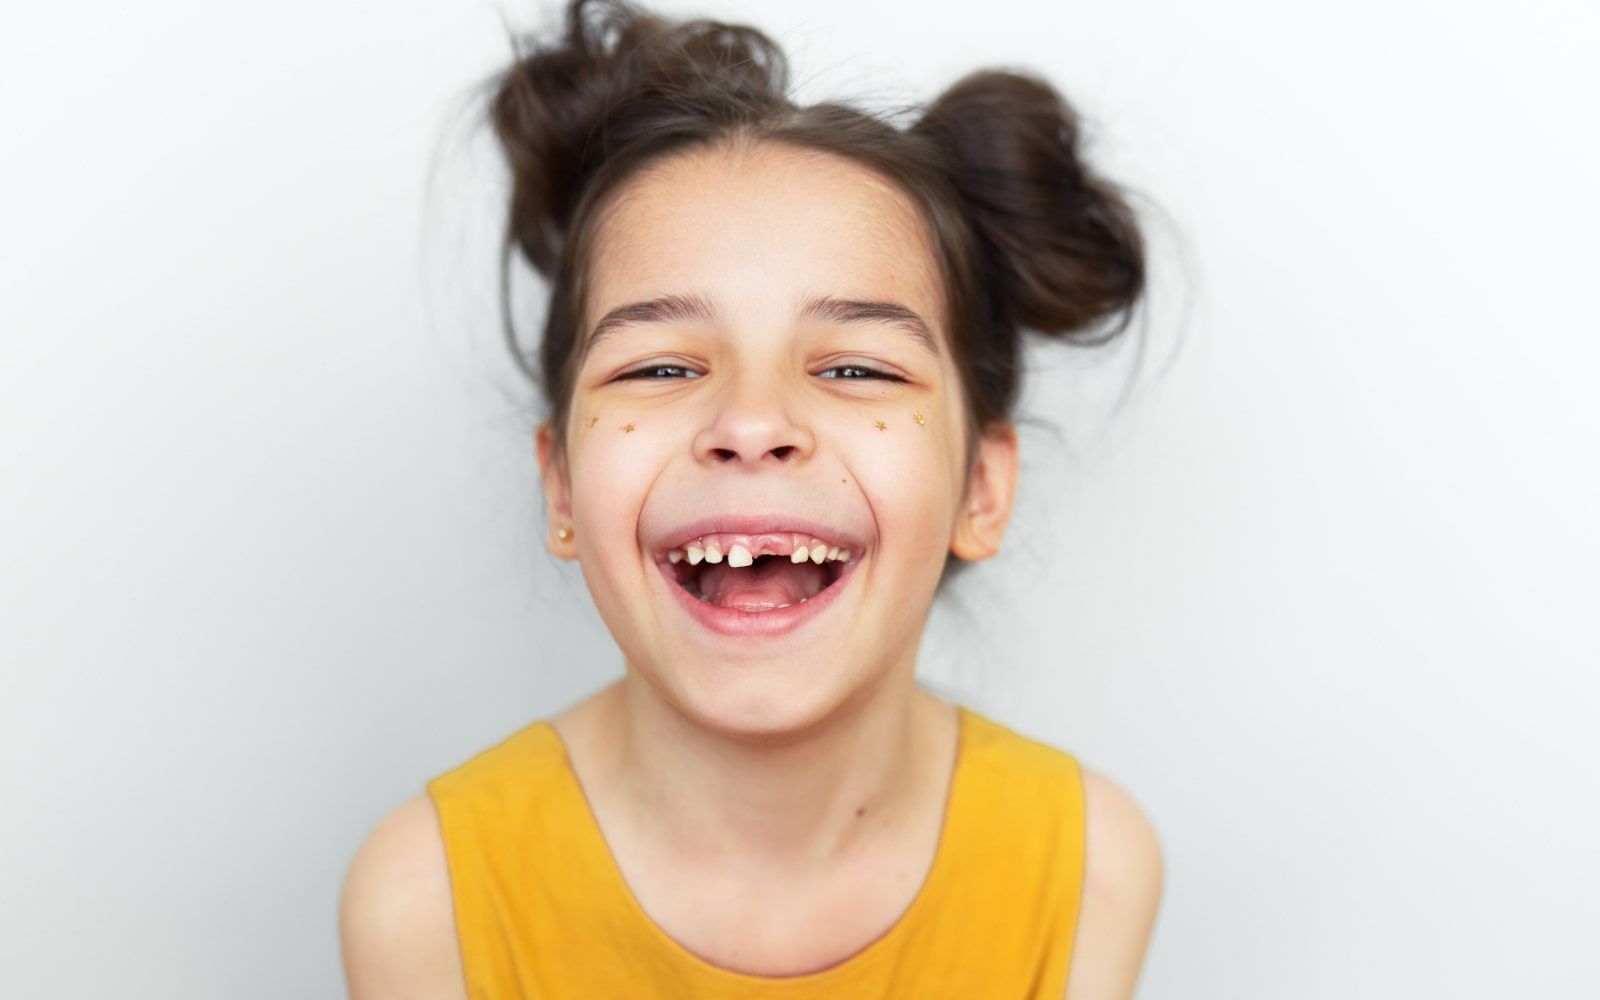 Child Smiling with Missing Teeth